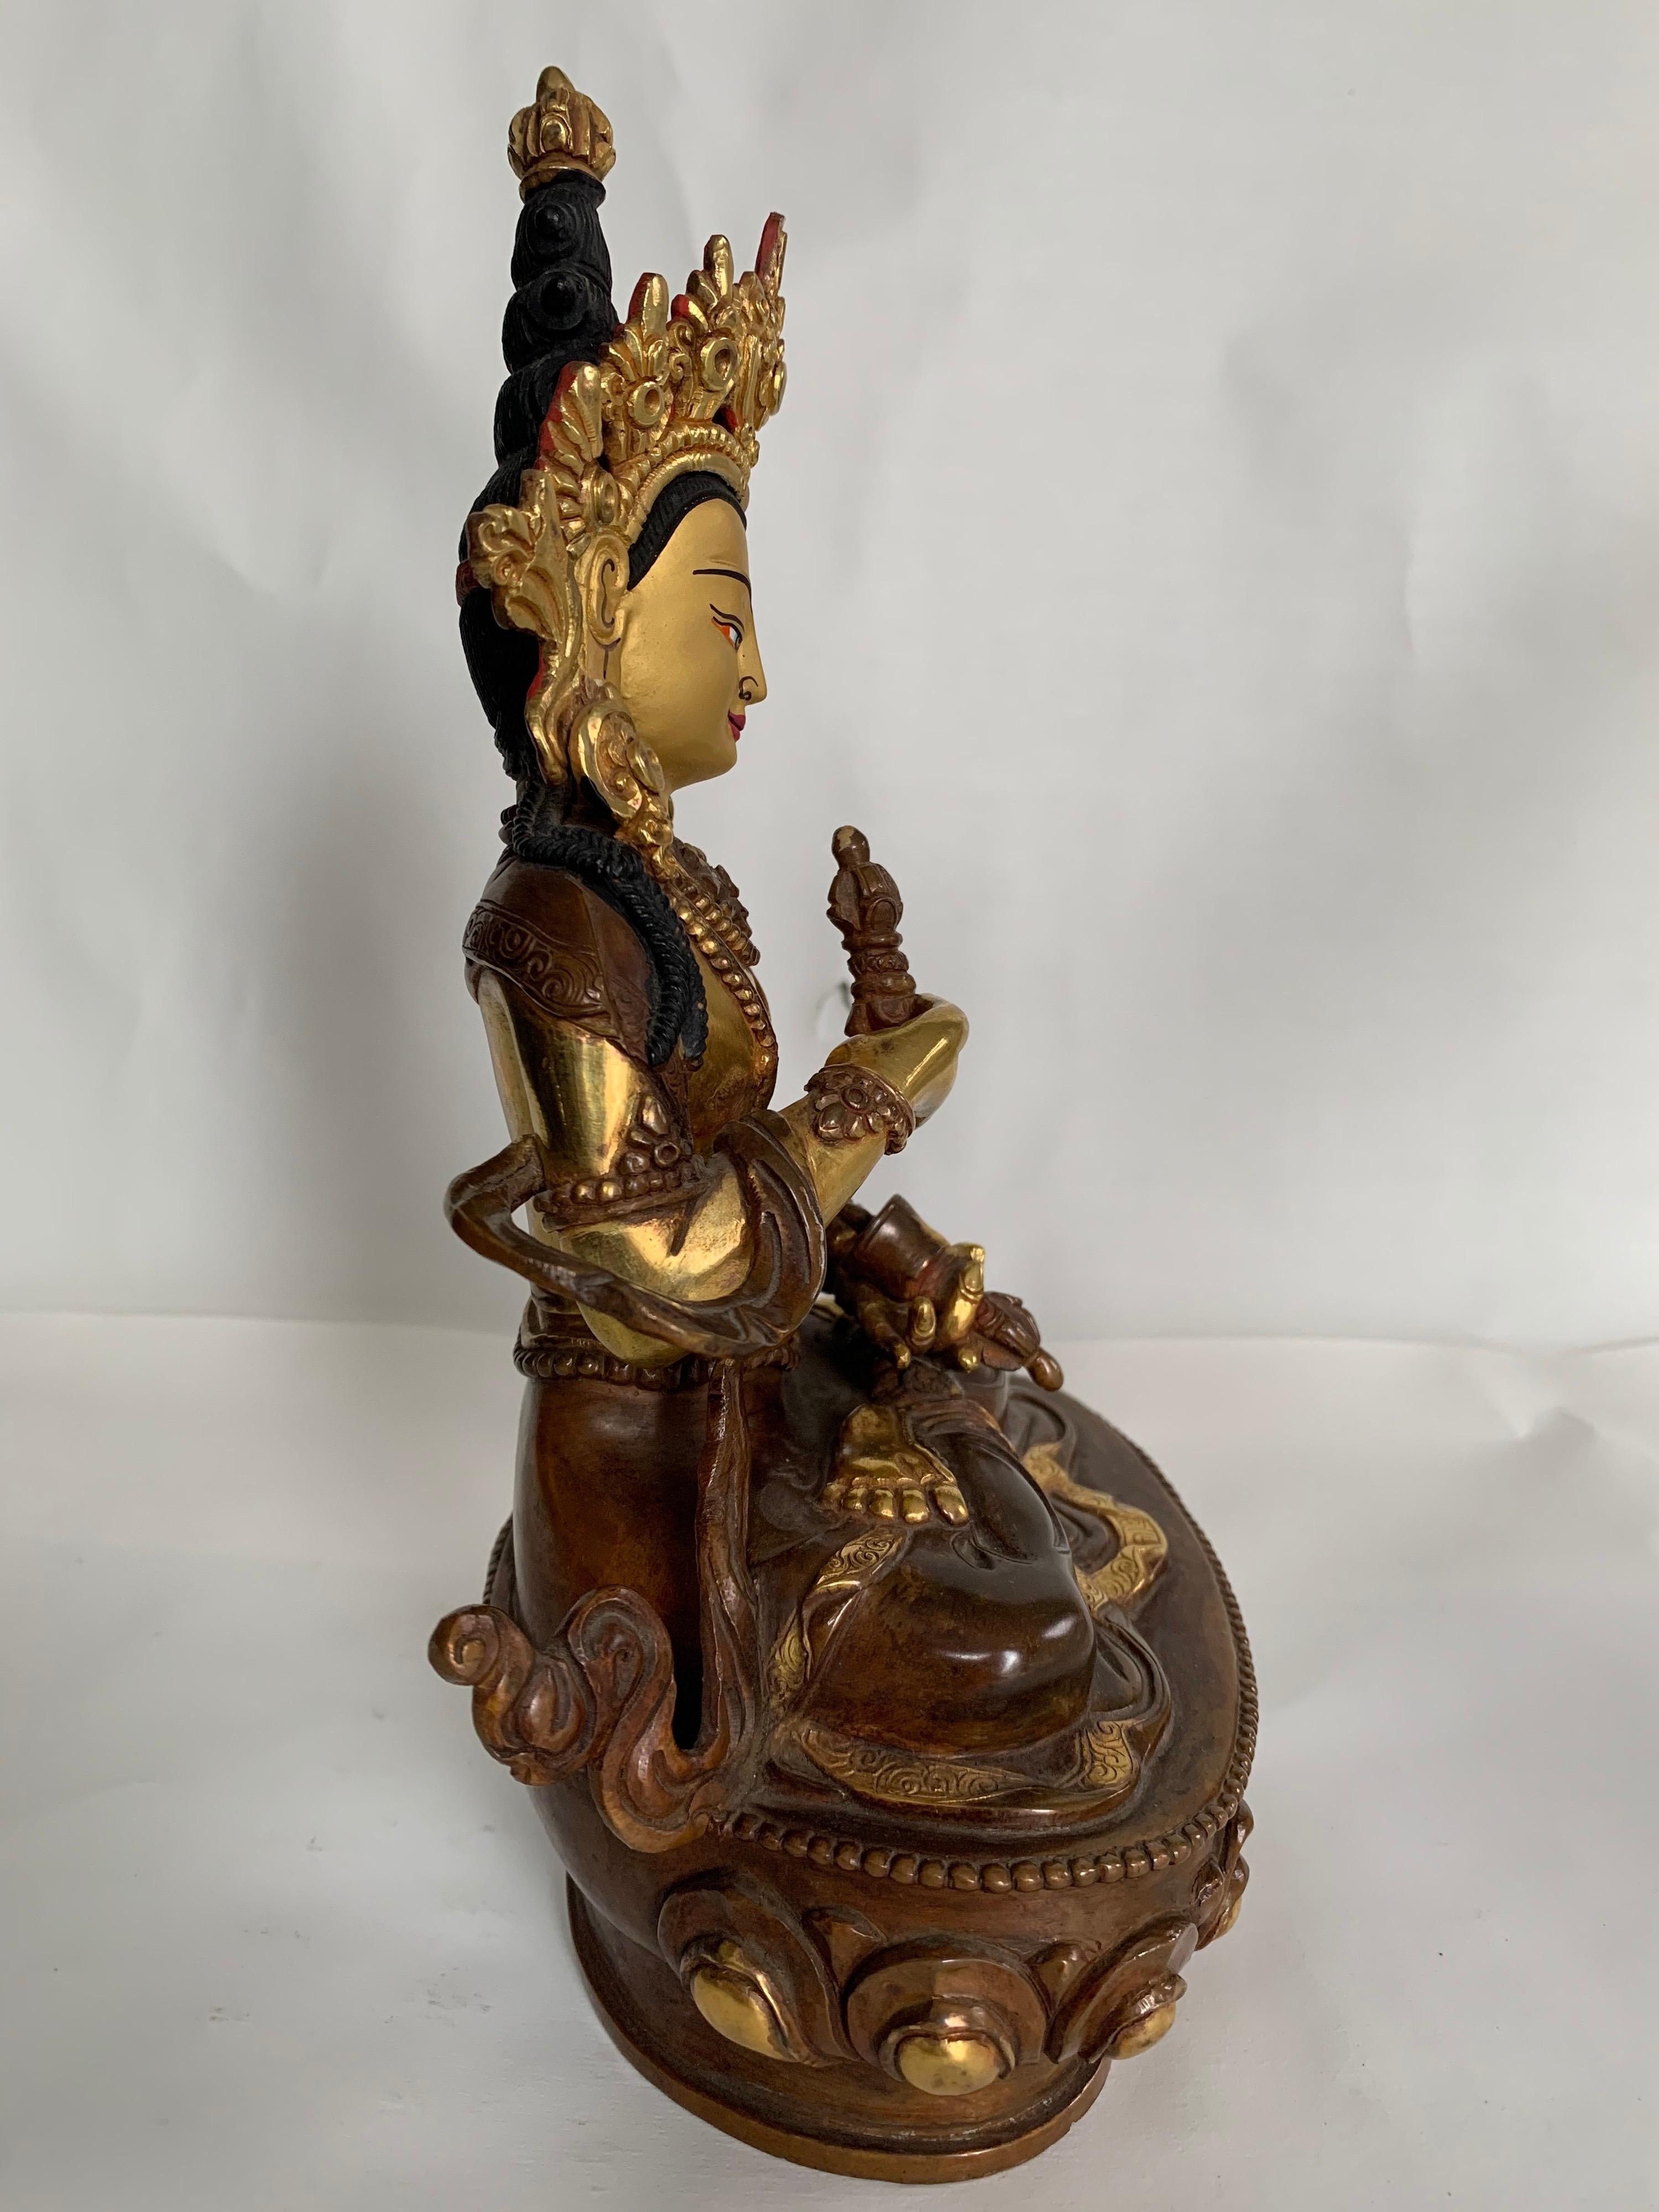 Vajrasattva Statue 9 Inch with 24K Gold Handcrafted by Lost Wax Process - Gray Figurative Sculpture by Unknown